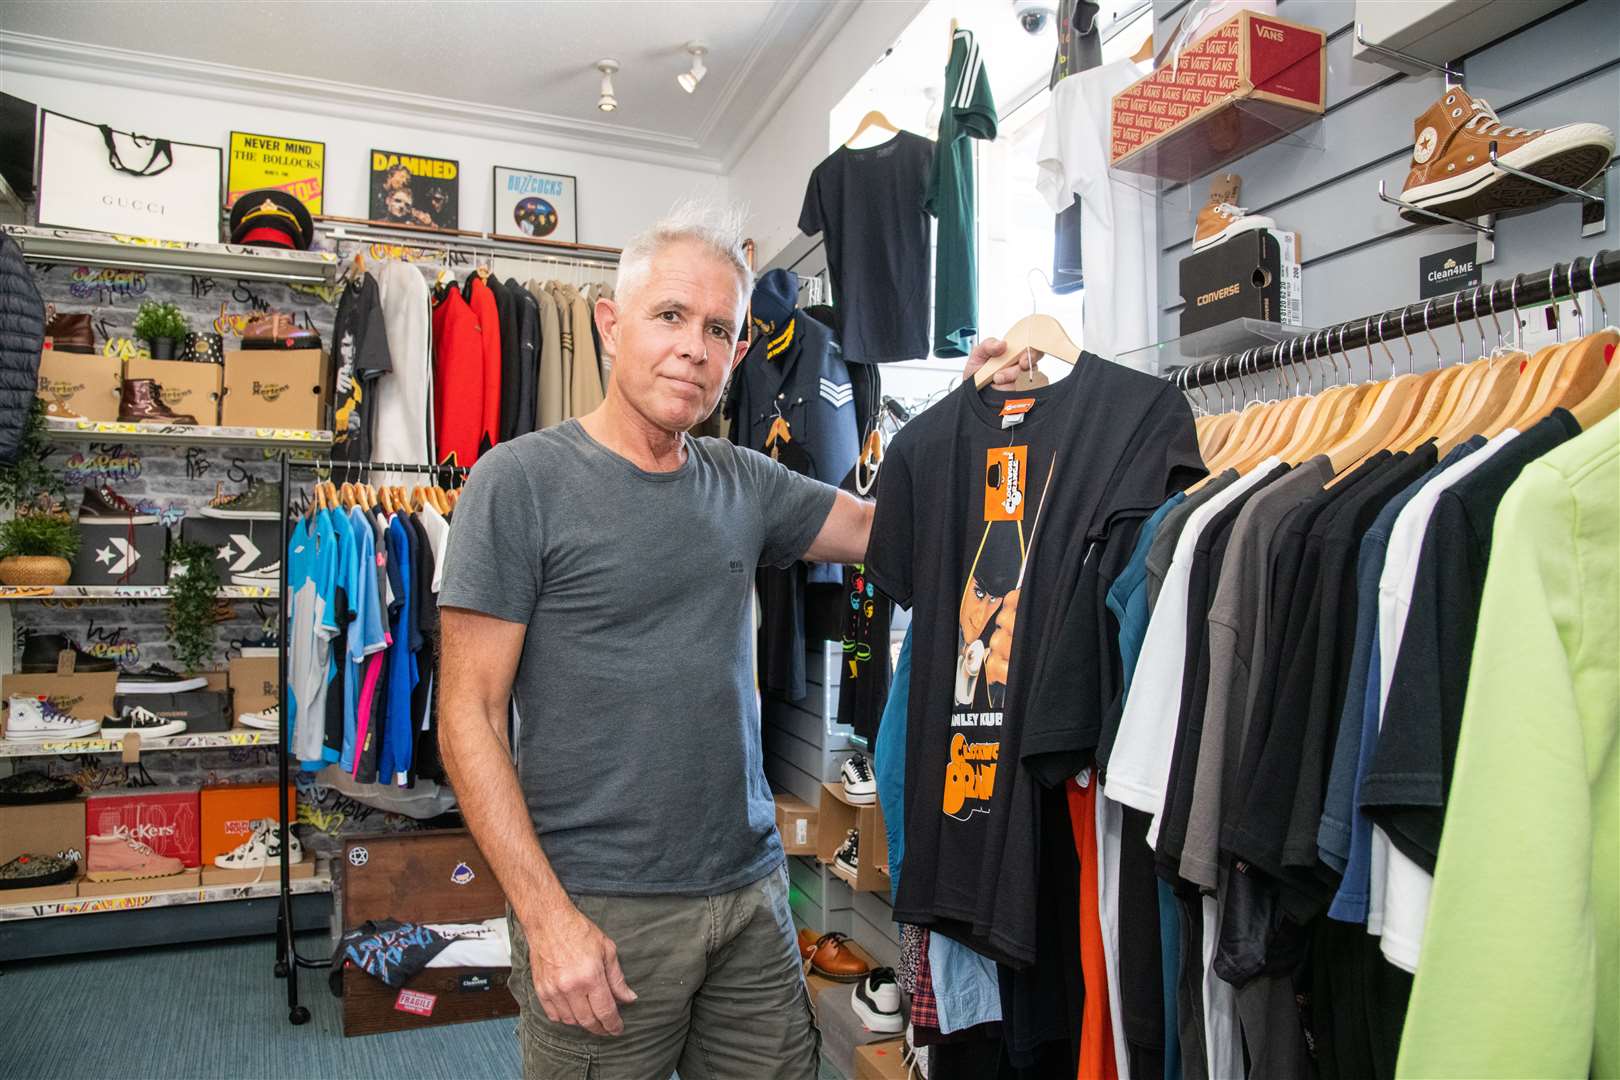 Andrew said his expansion into selling clothes has taken place "naturally".  Photo: Daniel Forsyth